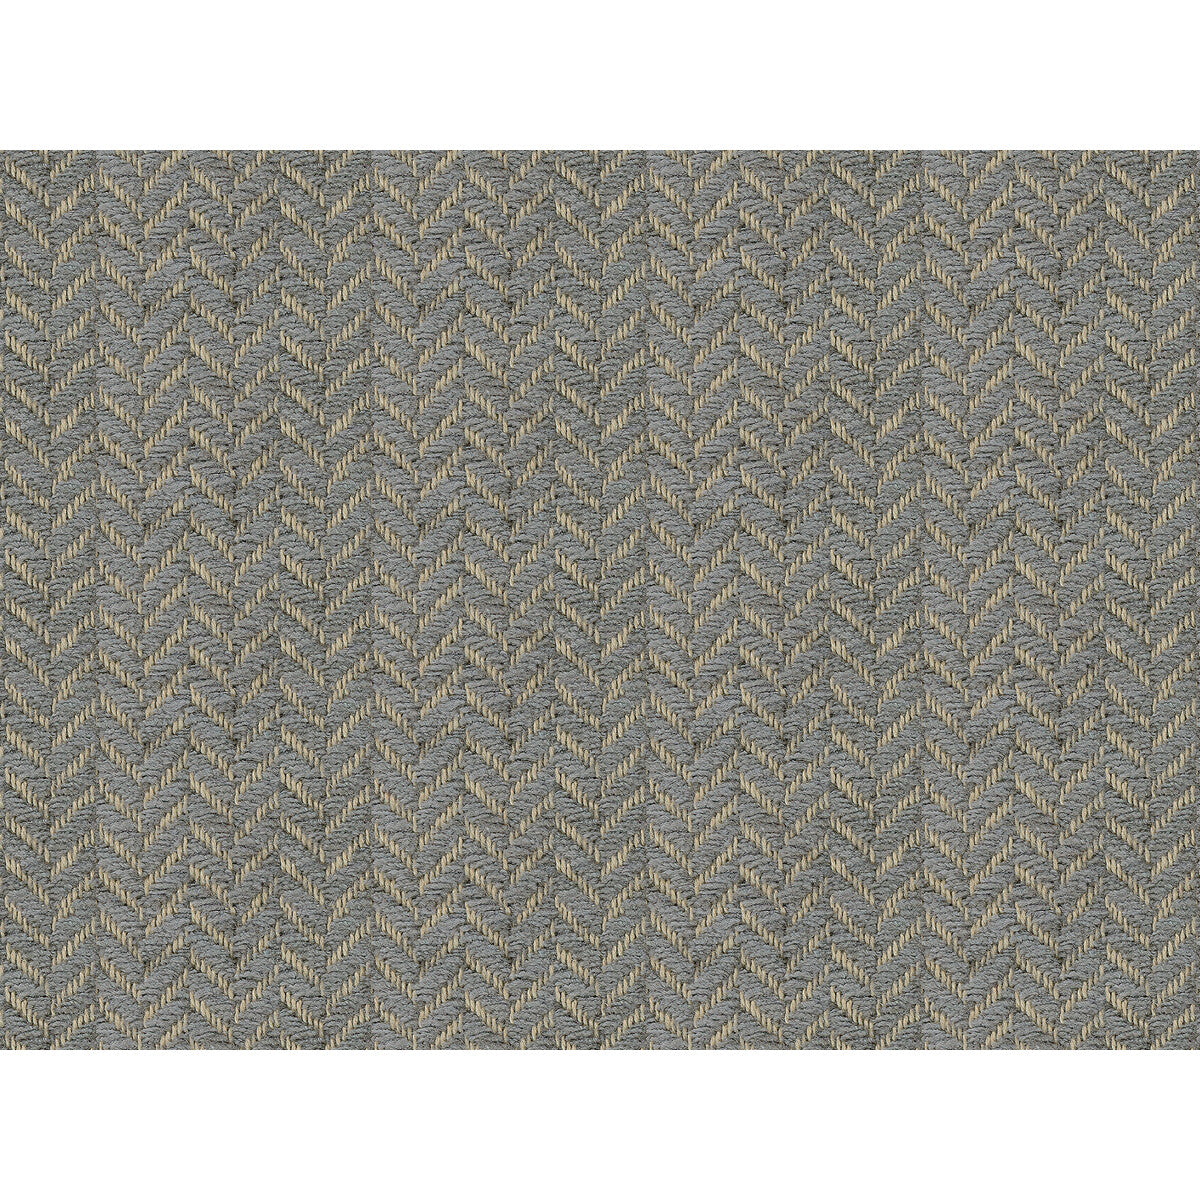 Mottaret Chenille fabric in grey color - pattern 8016111.11.0 - by Brunschwig &amp; Fils in the Chambery Textures collection